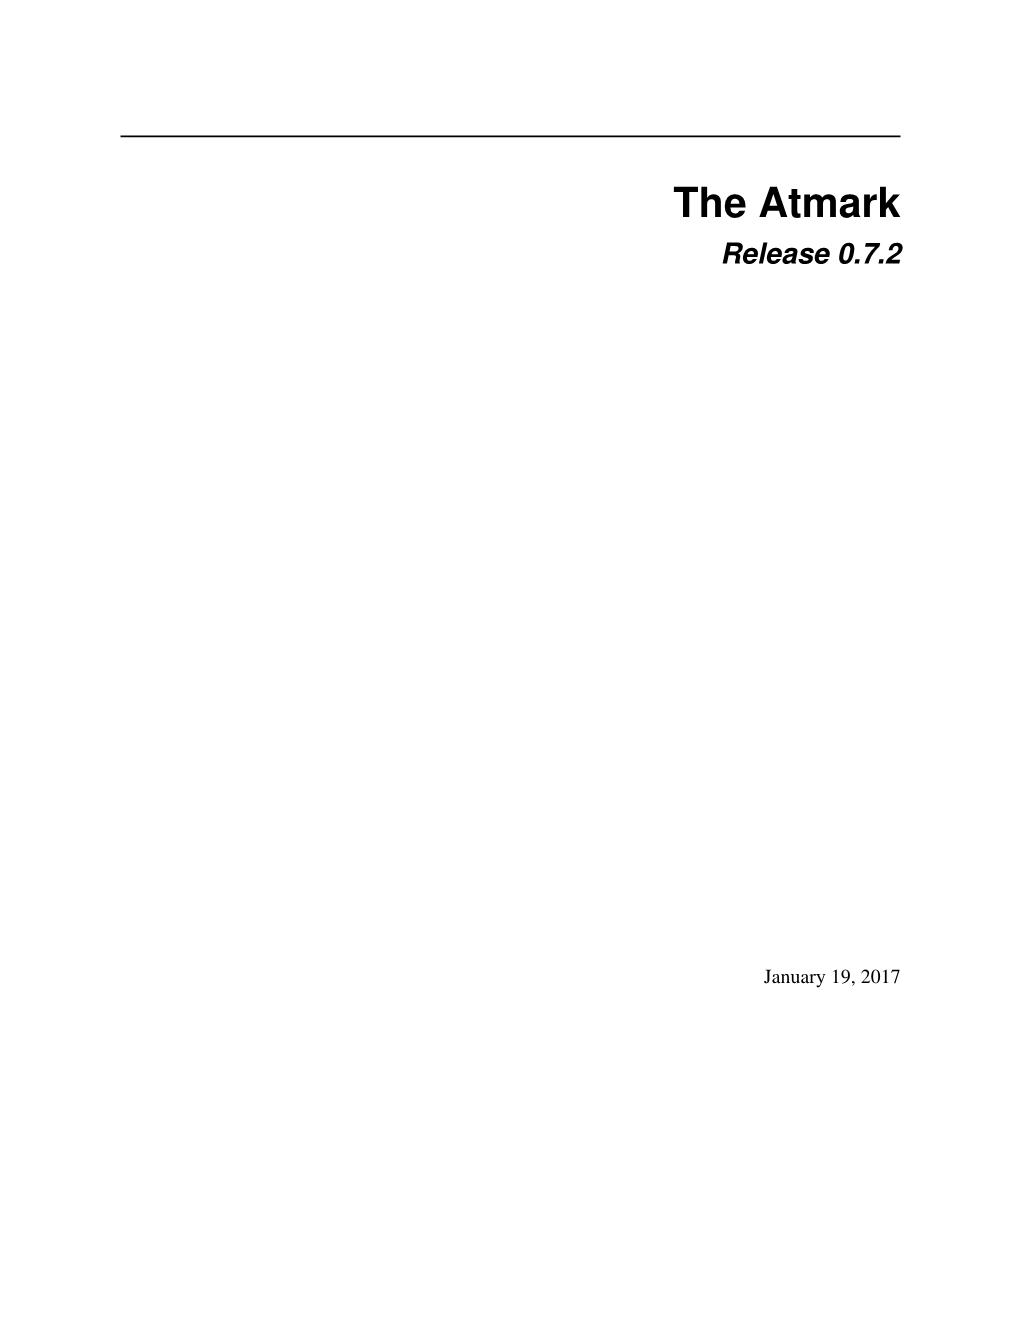 The Atmark Release 0.7.2